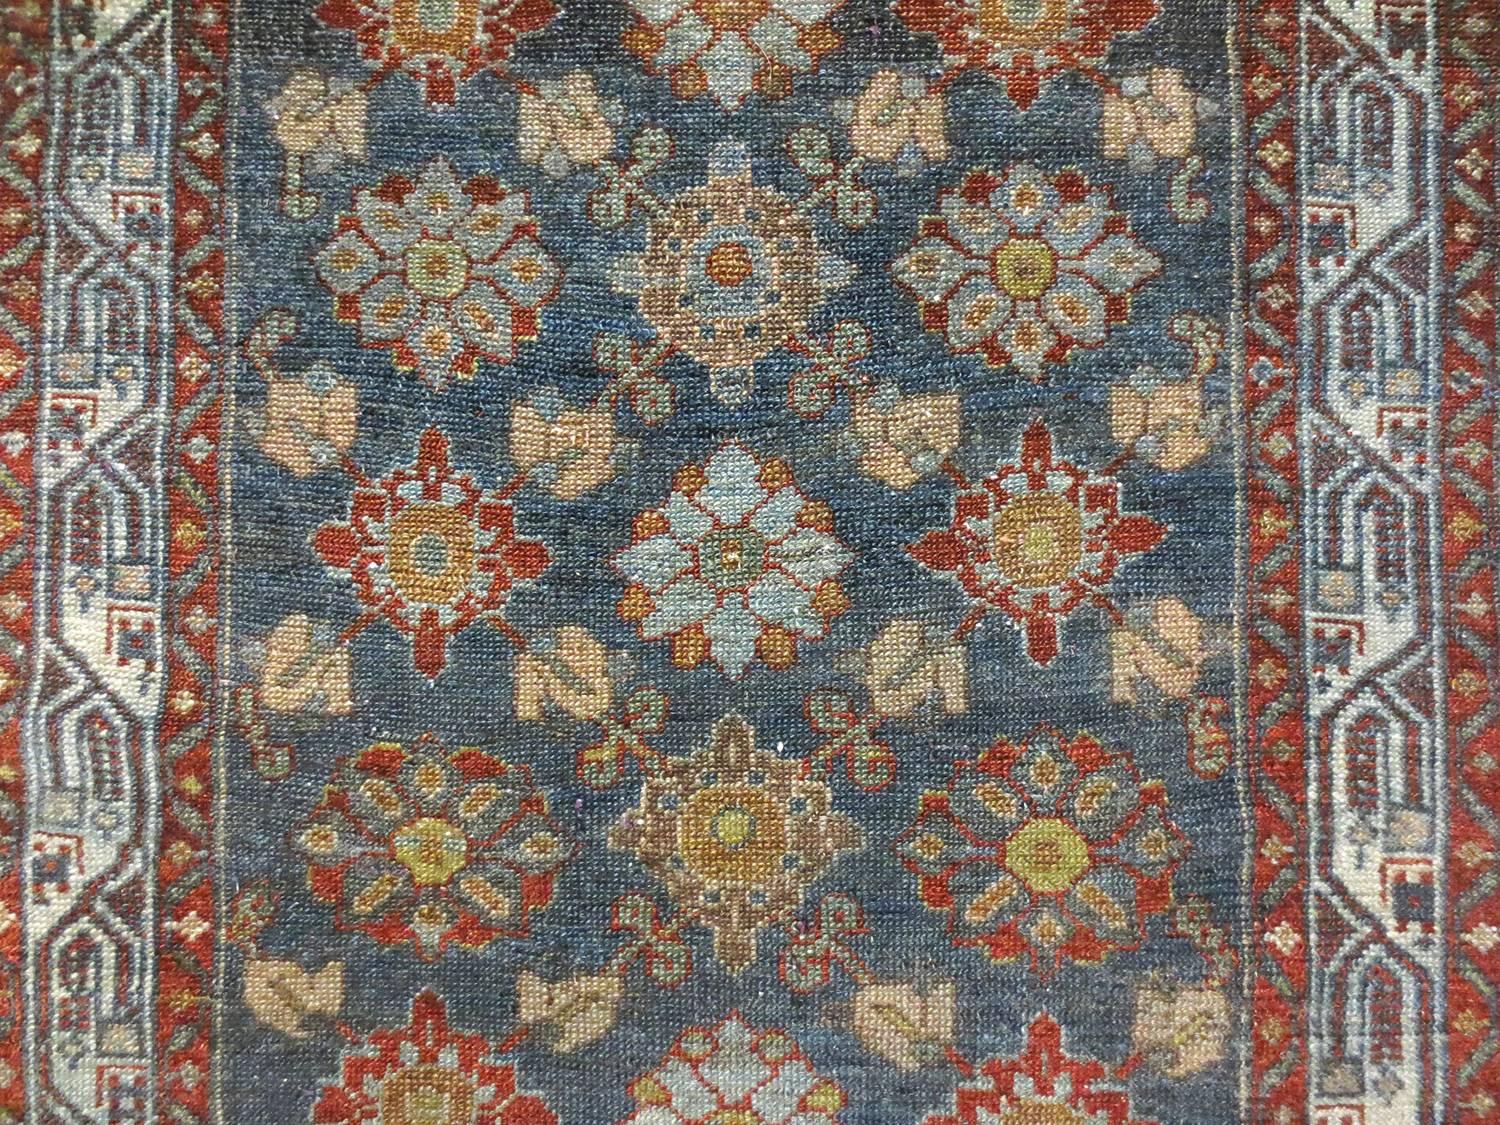 This is an antique Malayer, circa 1900s with a delightful viewing experience. This piece leads the eye down through a series of beautiful shapes and tones. It features a floral field on a cool blue background contrasting with warmer reds, yellows,